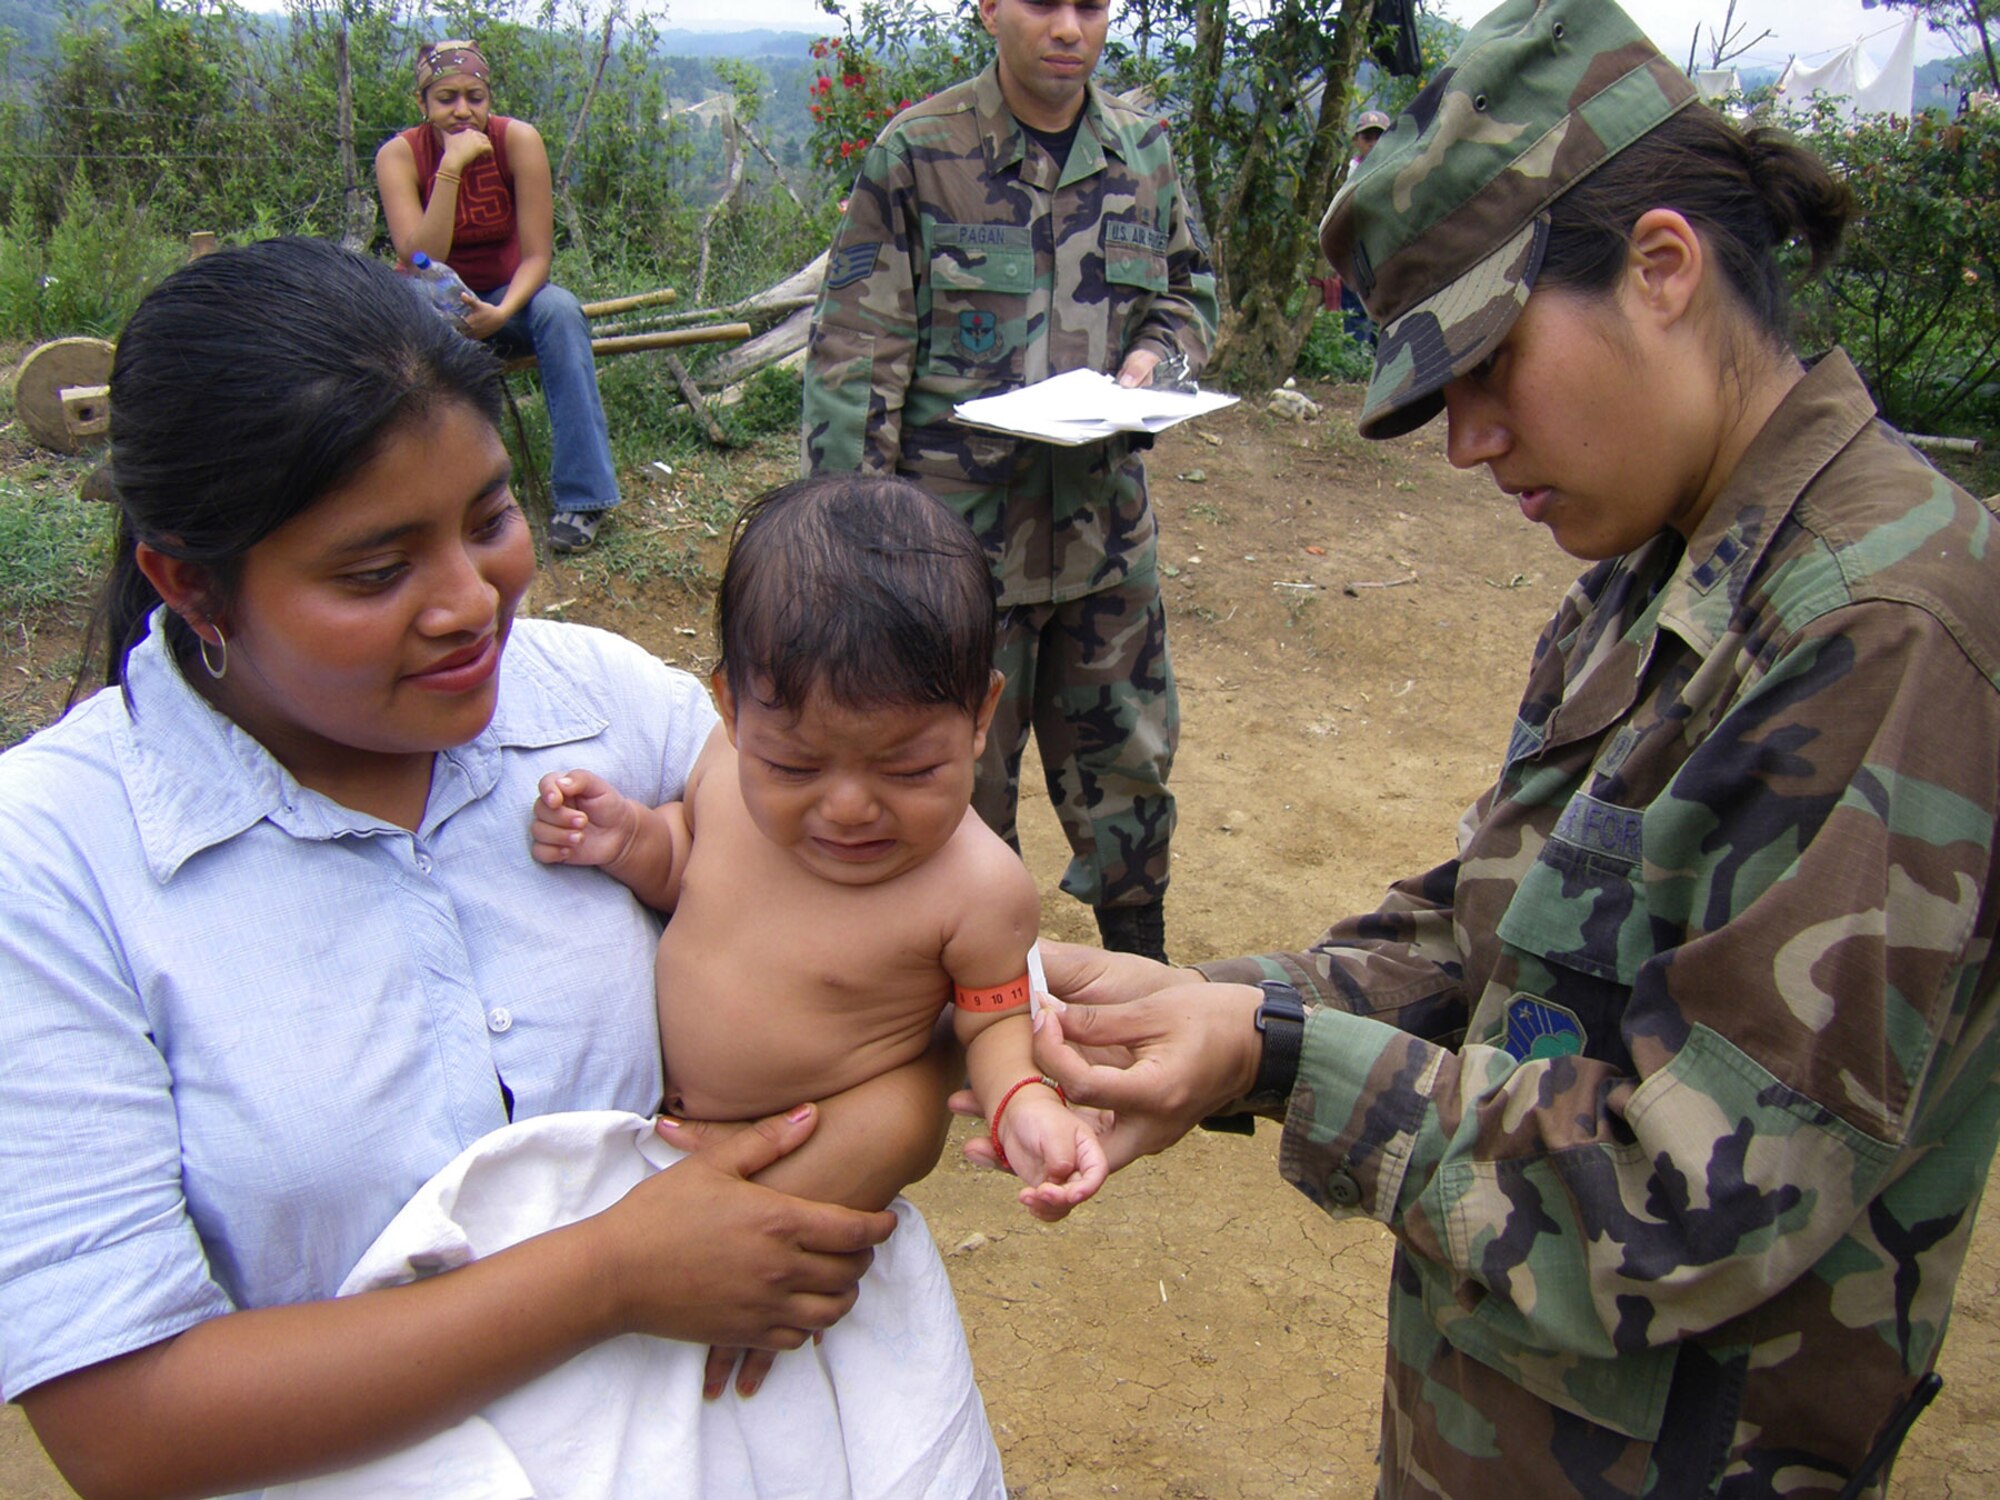 Capt. (Dr.) Larrisa Newman measures the mid-upper arm circumference of a child in Honduras June 3 to evaluate for malnutrition. Every four months, teams of U.S. military pediatricians and nutritionists drive and hike to the homes of people living in remote areas of Honduras to screen for malnutrition and anemia as well as provide basic medical care. Doctor Newman is a pediatric resident from Wilford Hall Medical Center in San Antonio, Texas. (U.S. Air Force photo/Maj. Robert Elwood) 